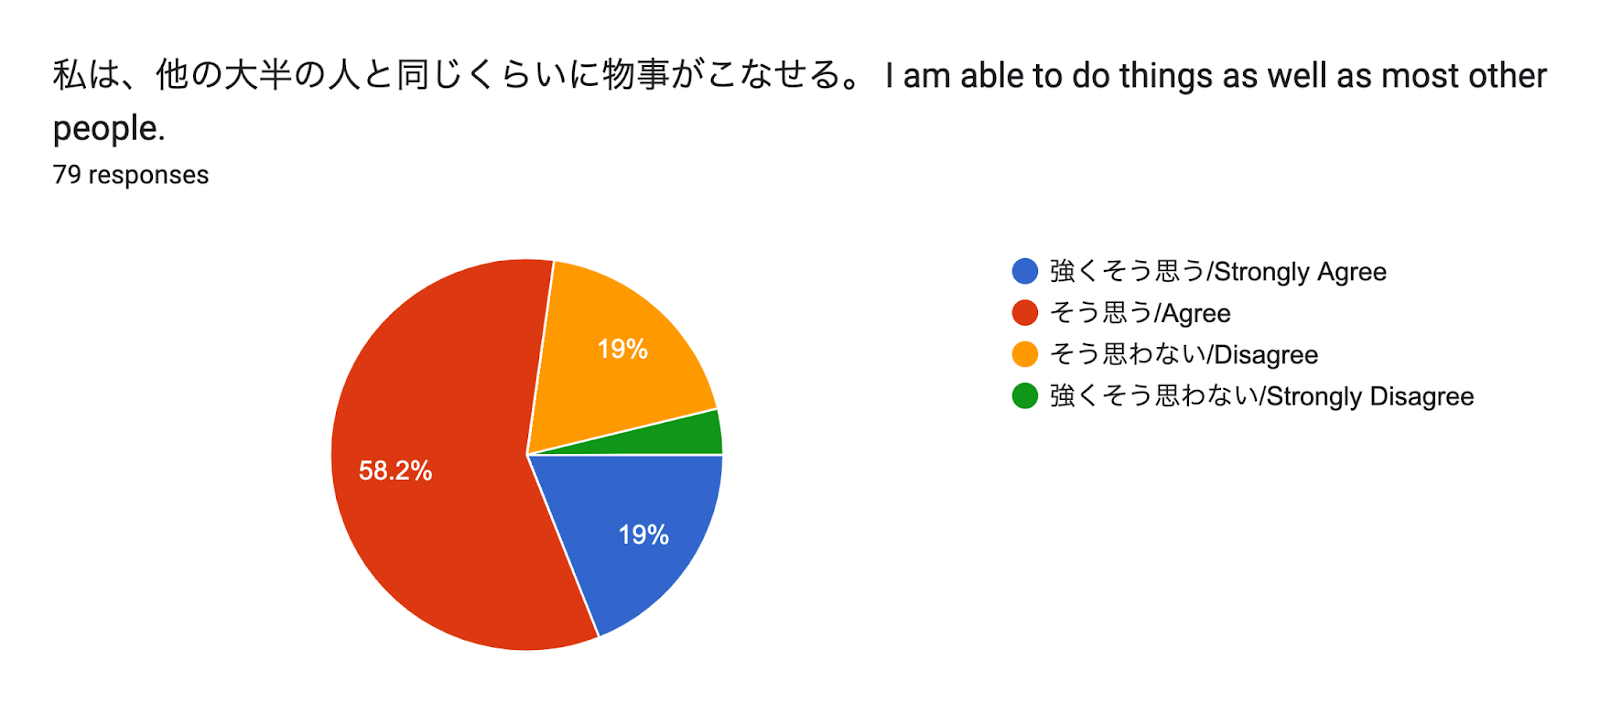 Forms response chart. Question title: 私は、他の大半の人と同じくらいに物事がこなせる。
I am able to do things as well as most other people.
. Number of responses: 79 responses.